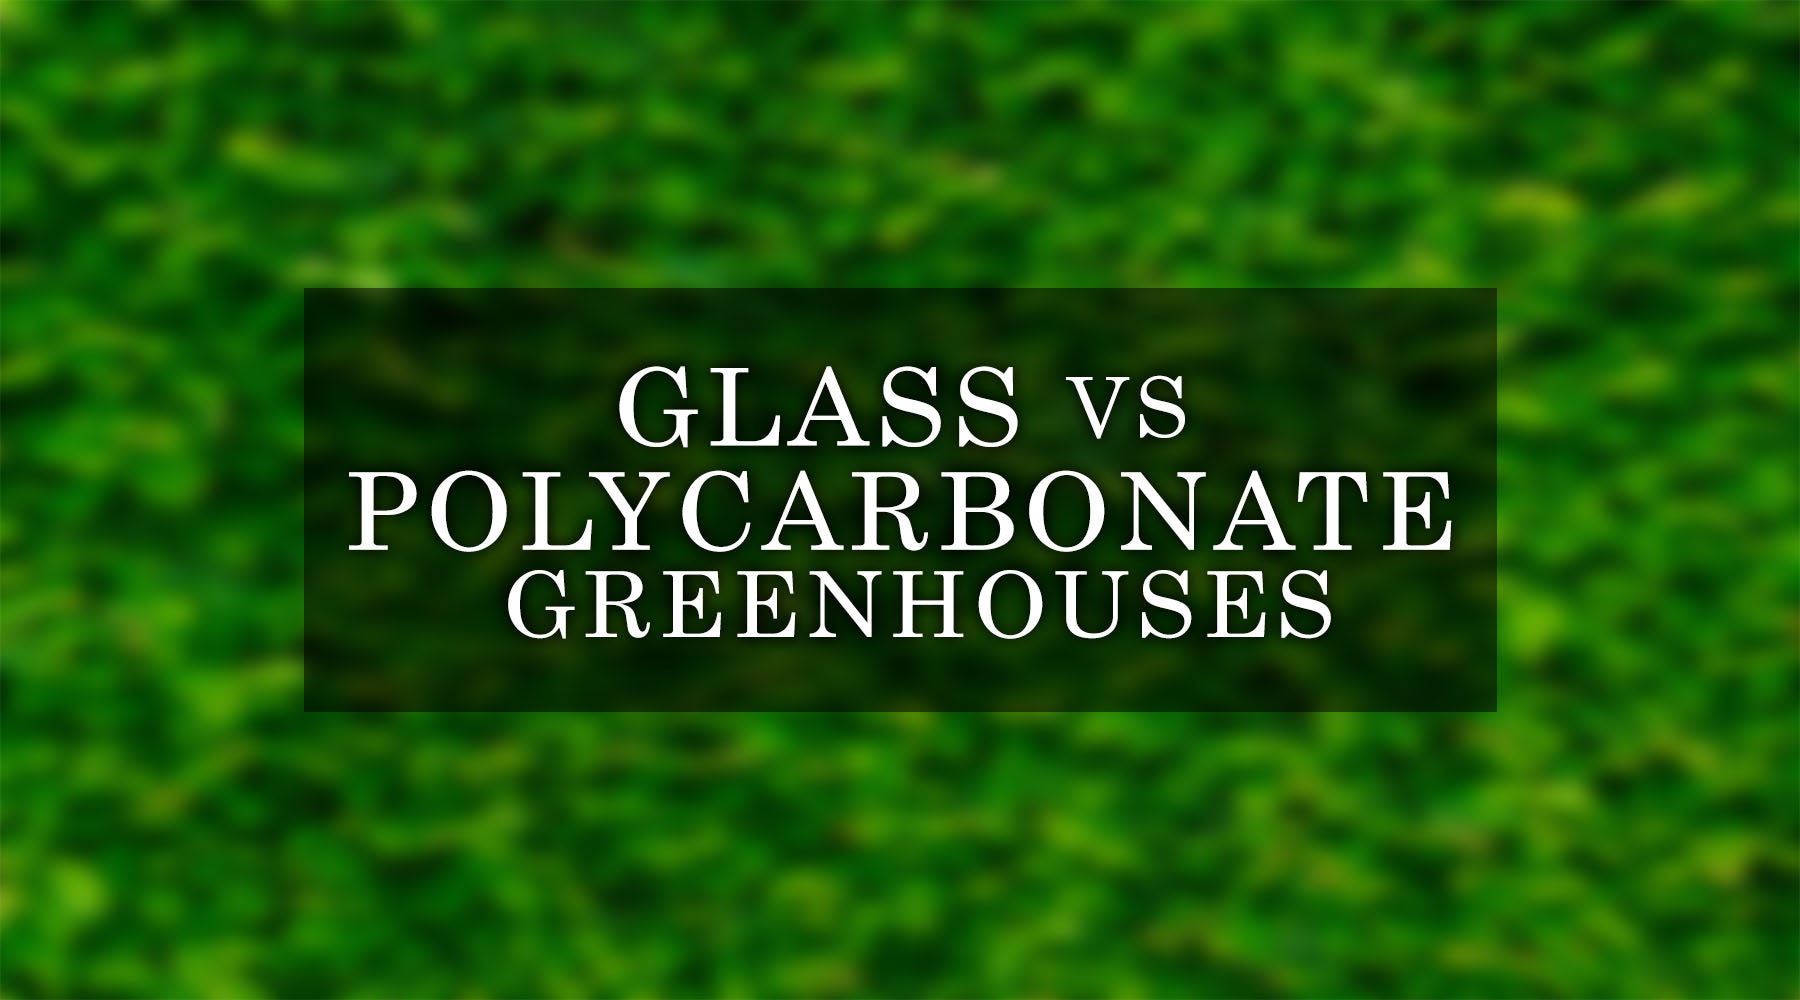 Glass vs Polycarbonate Greenhouses: Which is Better for Your Growing Needs?